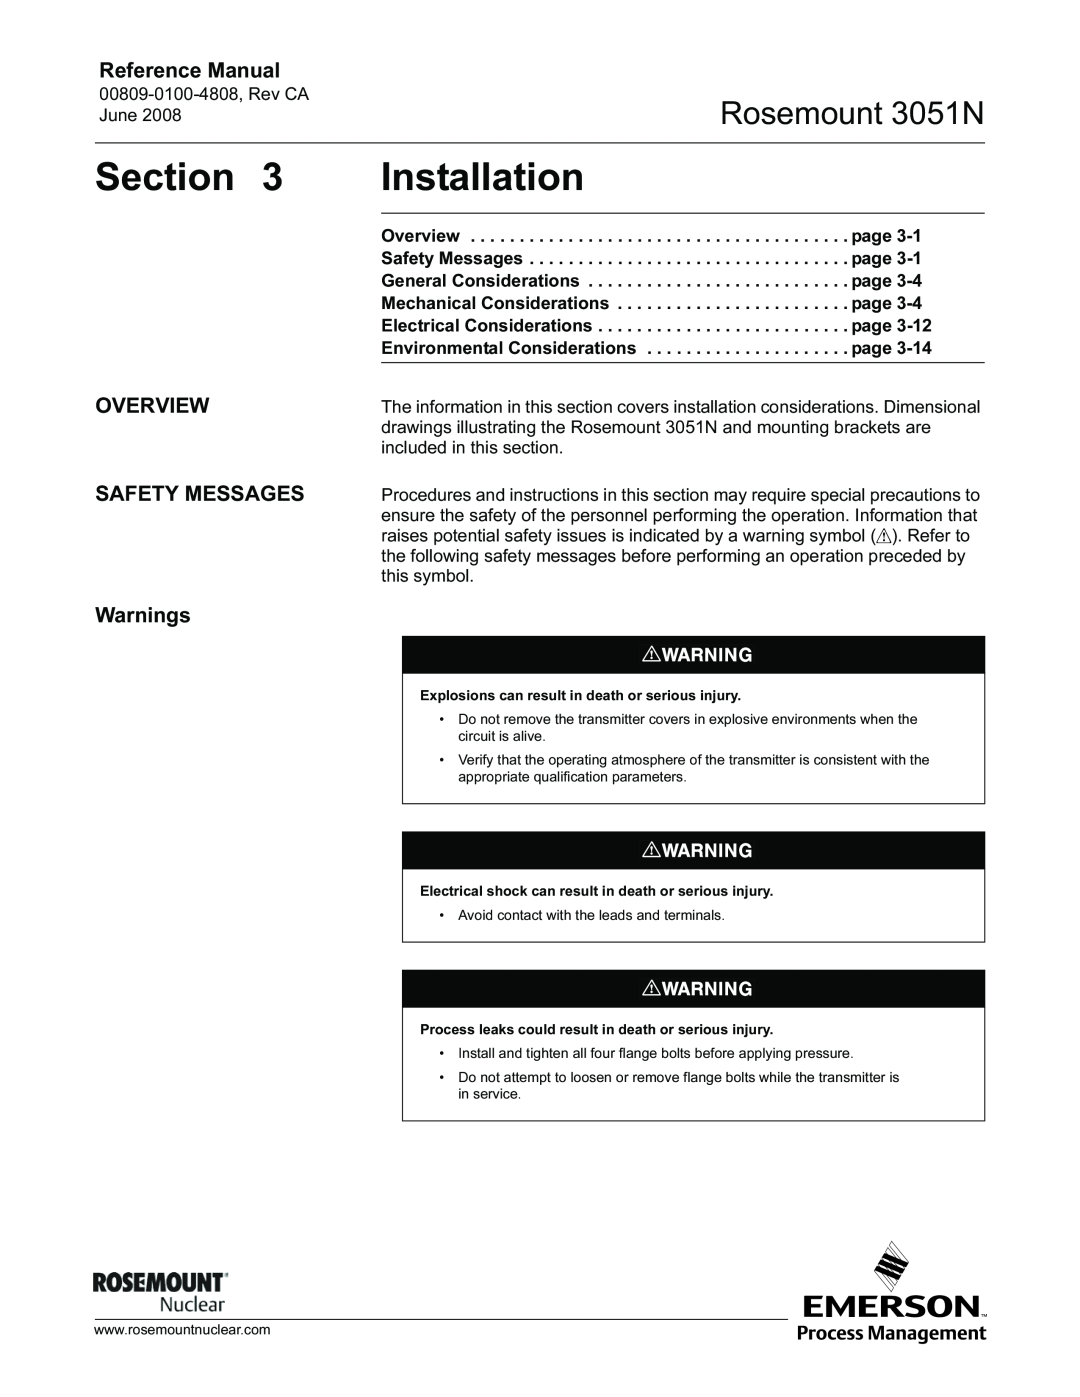 Emerson manual Installation, Section, Rosemount 3051N, Reference Manual, OVERVIEW SAFETY MESSAGES Warnings 